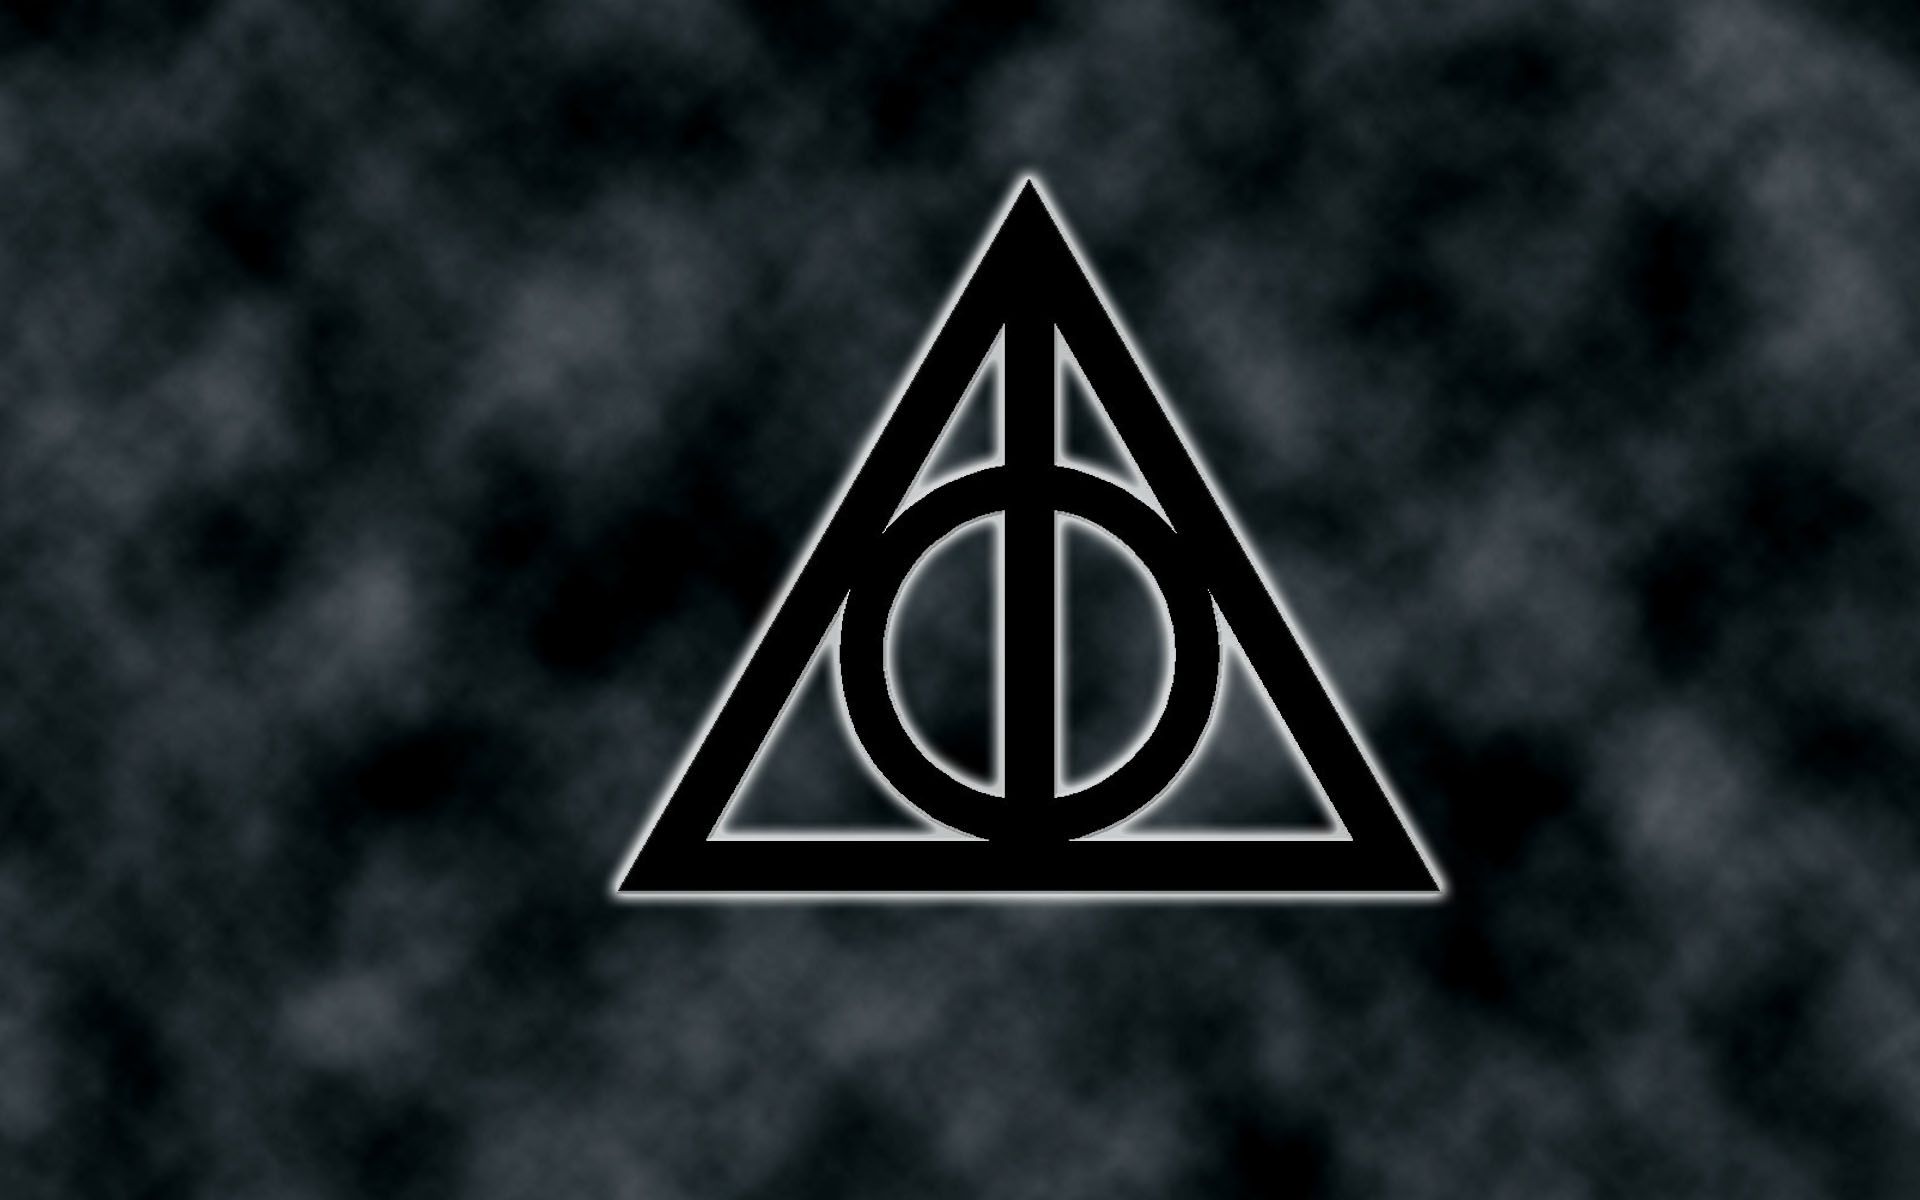 Harry Potter Deathly Hallows Wallpaper